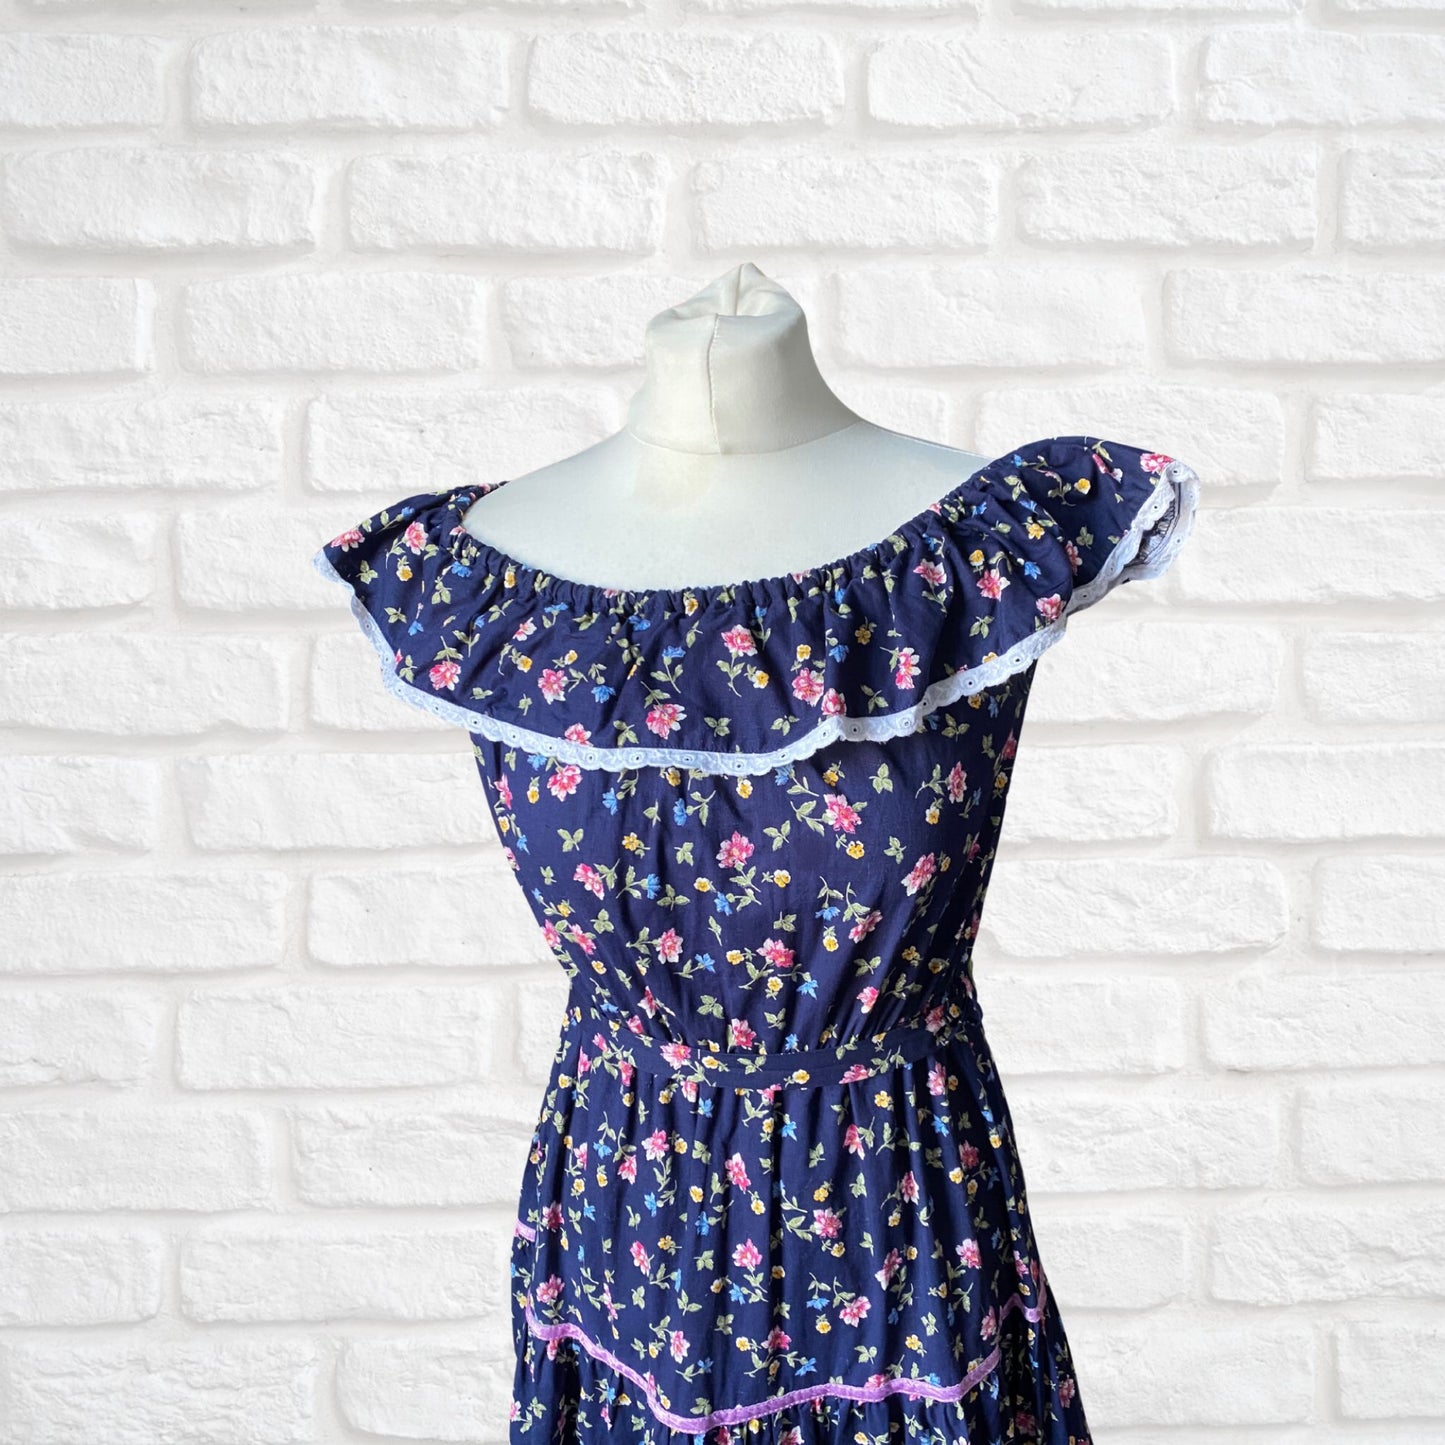 Vintage Summer floral prairie dress with neck frill and white lace trim . Approx UK size 10-12